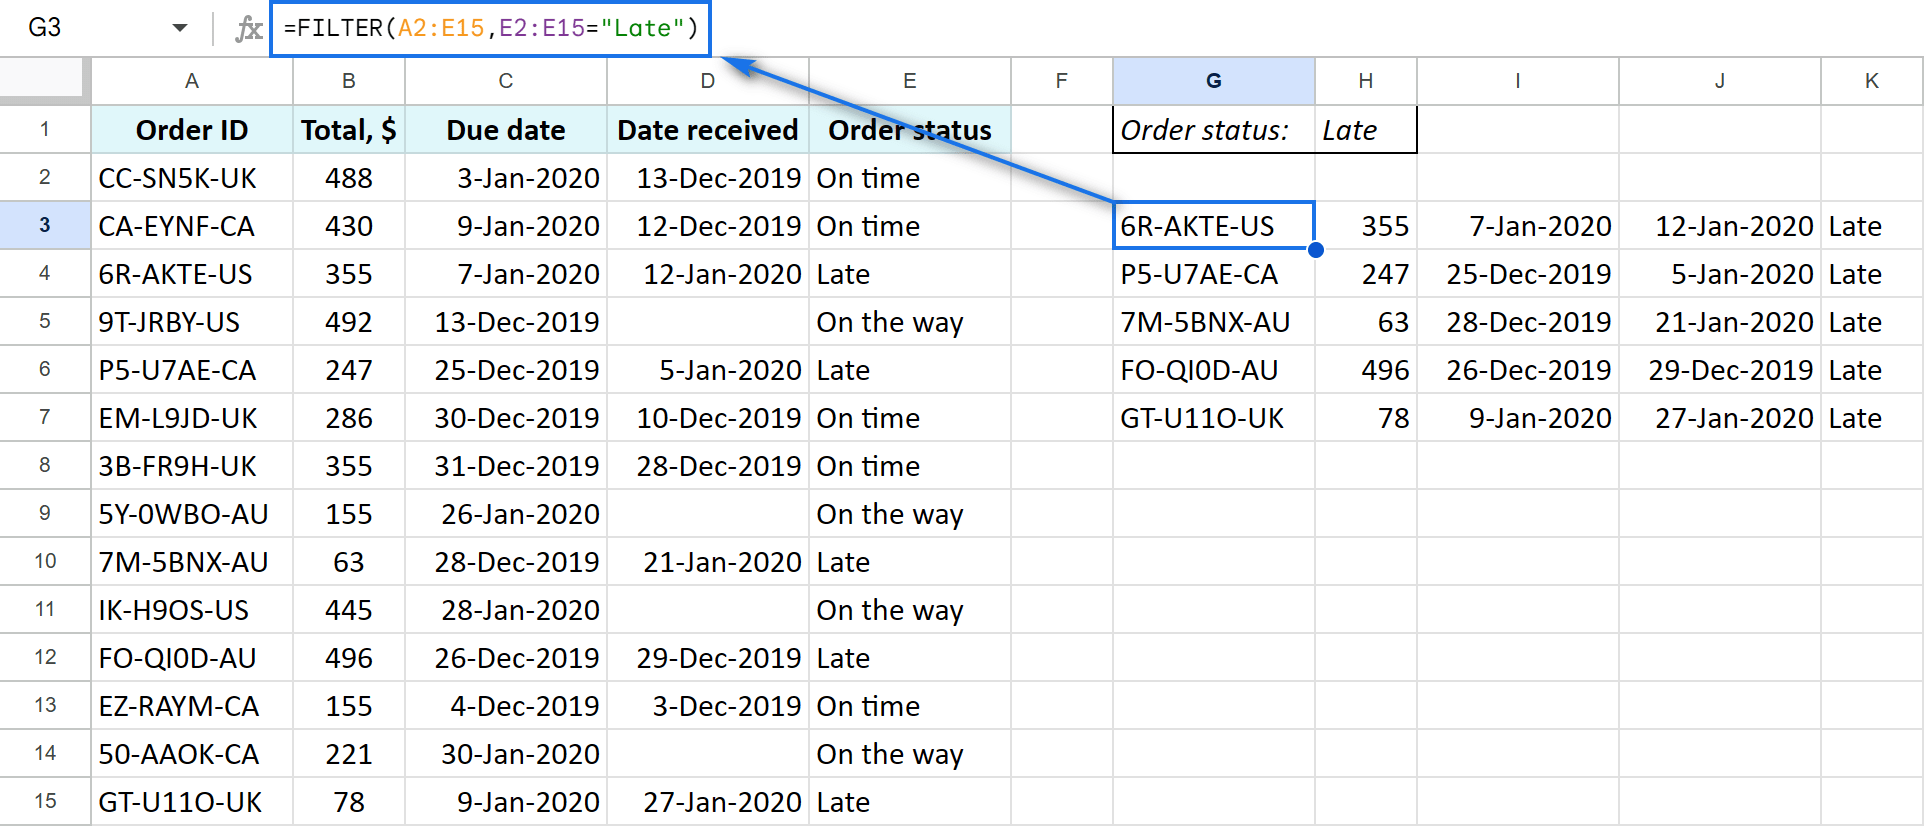 Filter Google Sheets by text.